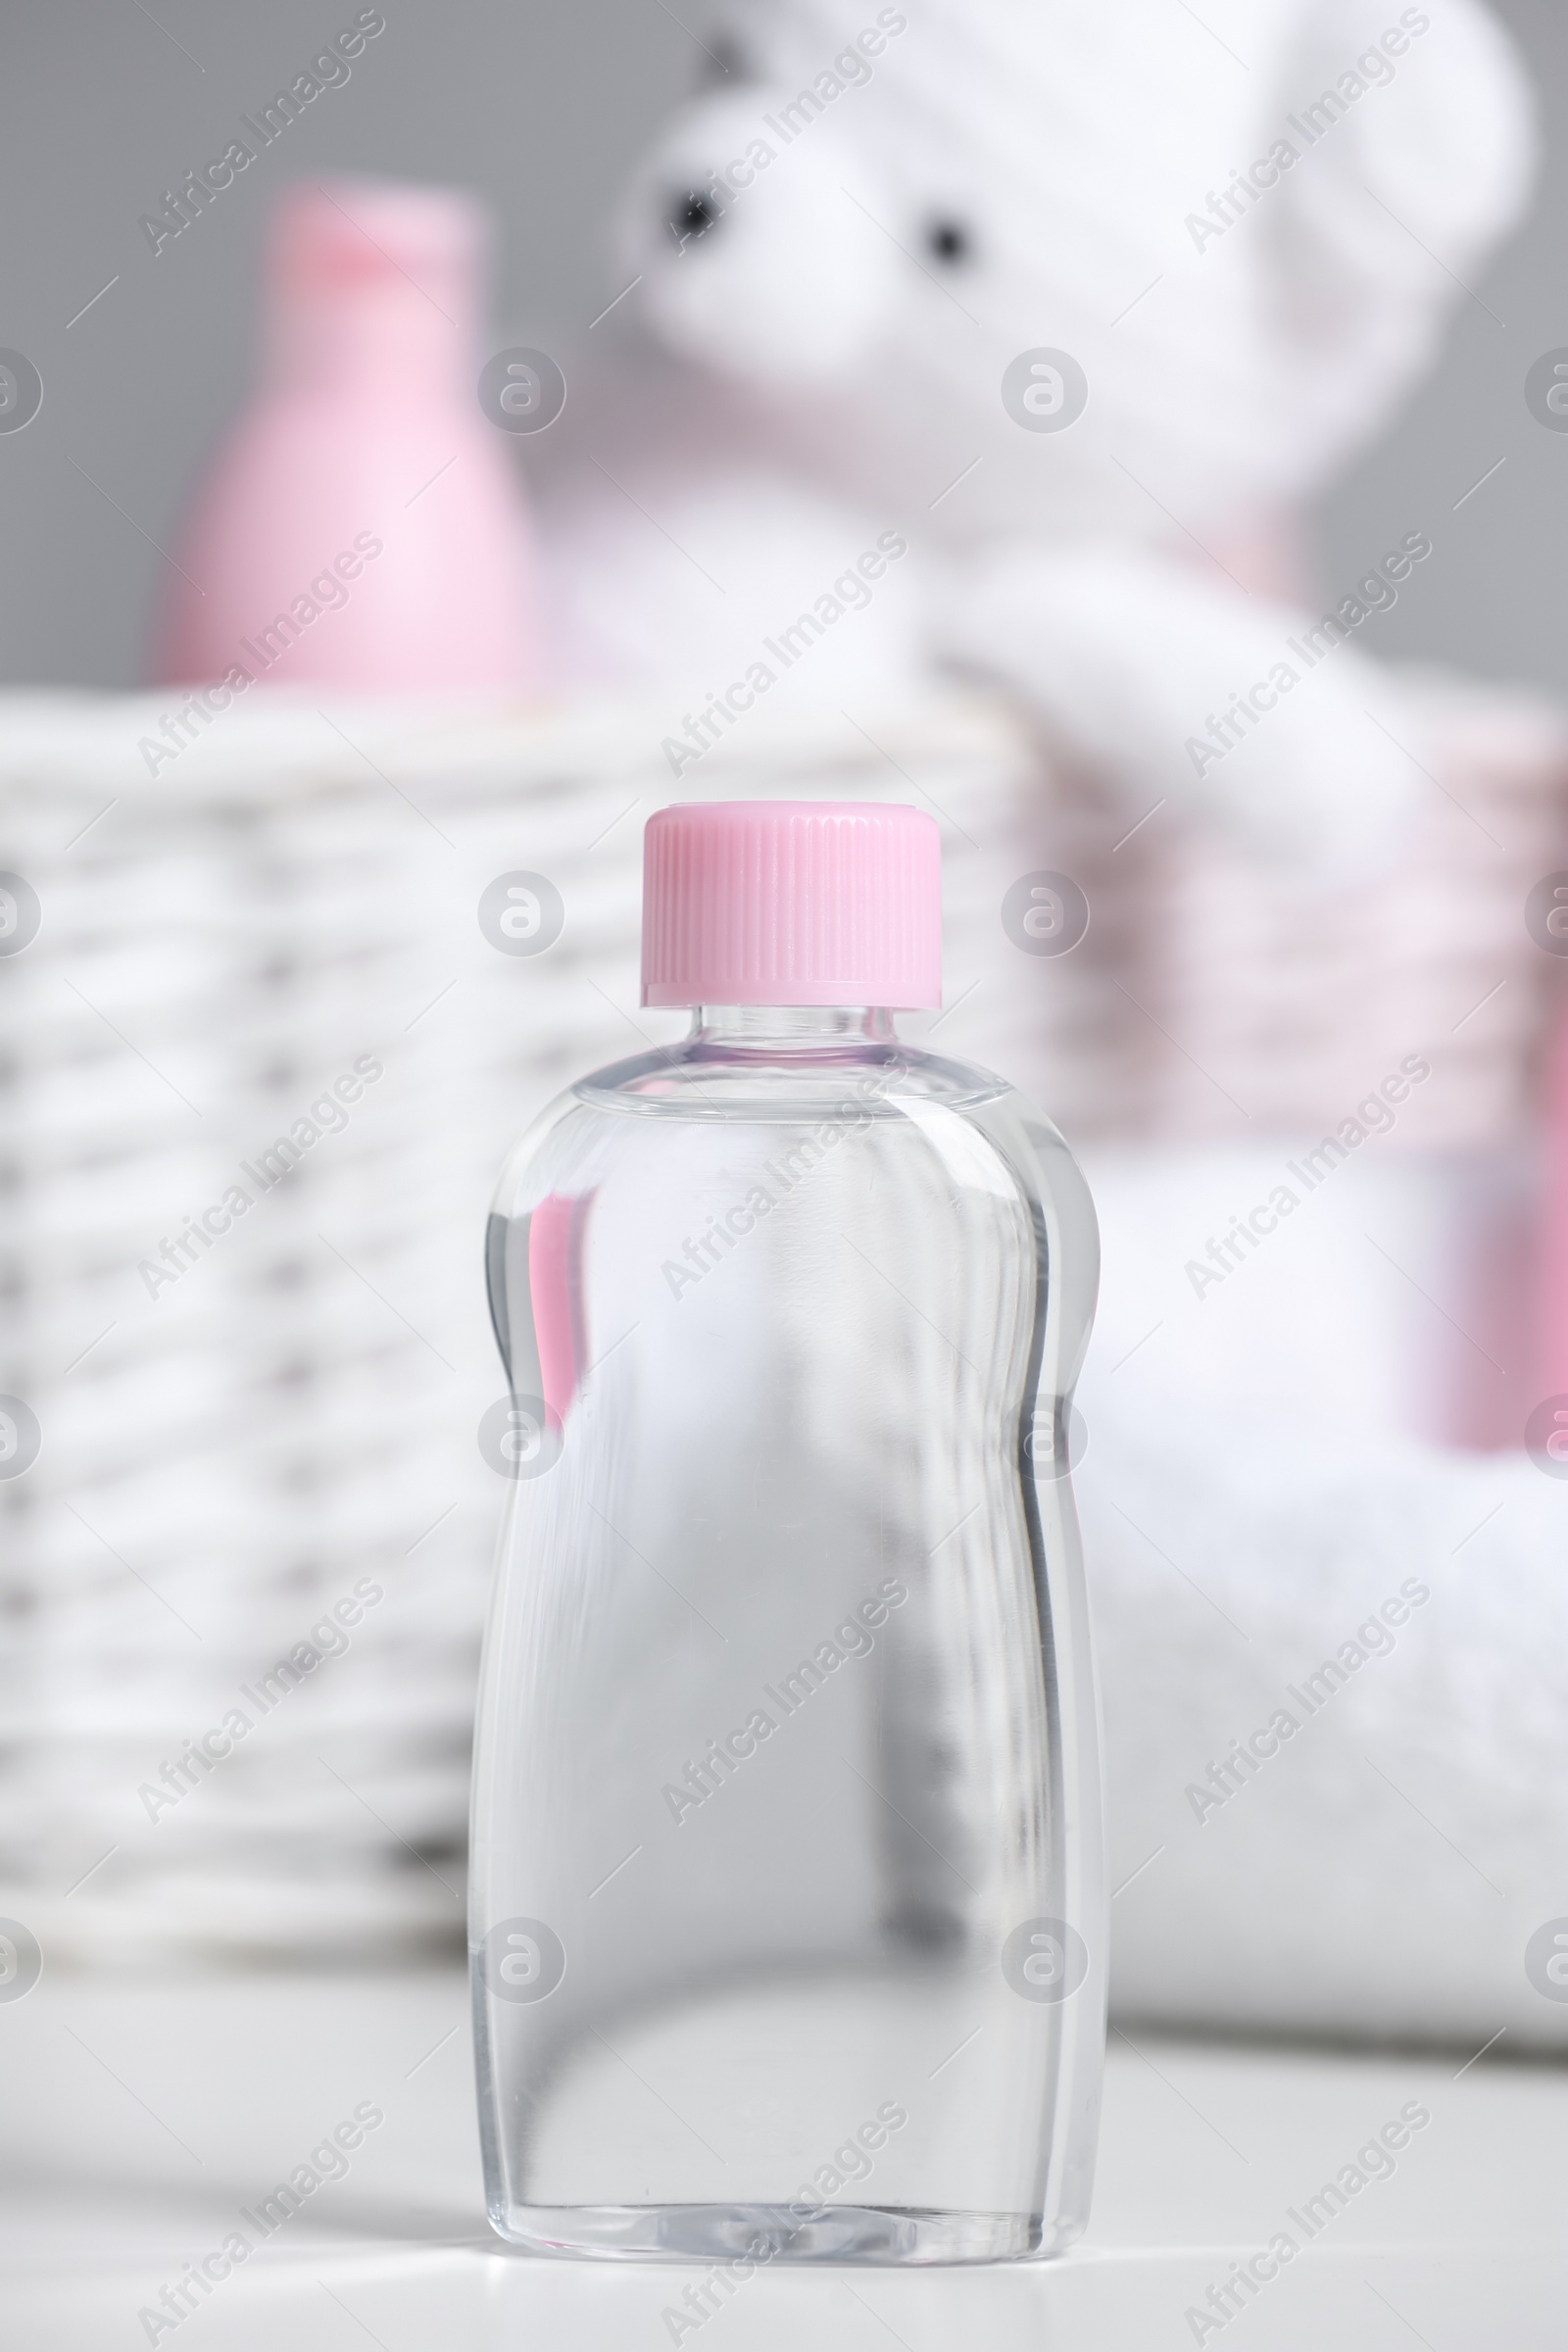 Photo of Bottle of baby cosmetic product on white table